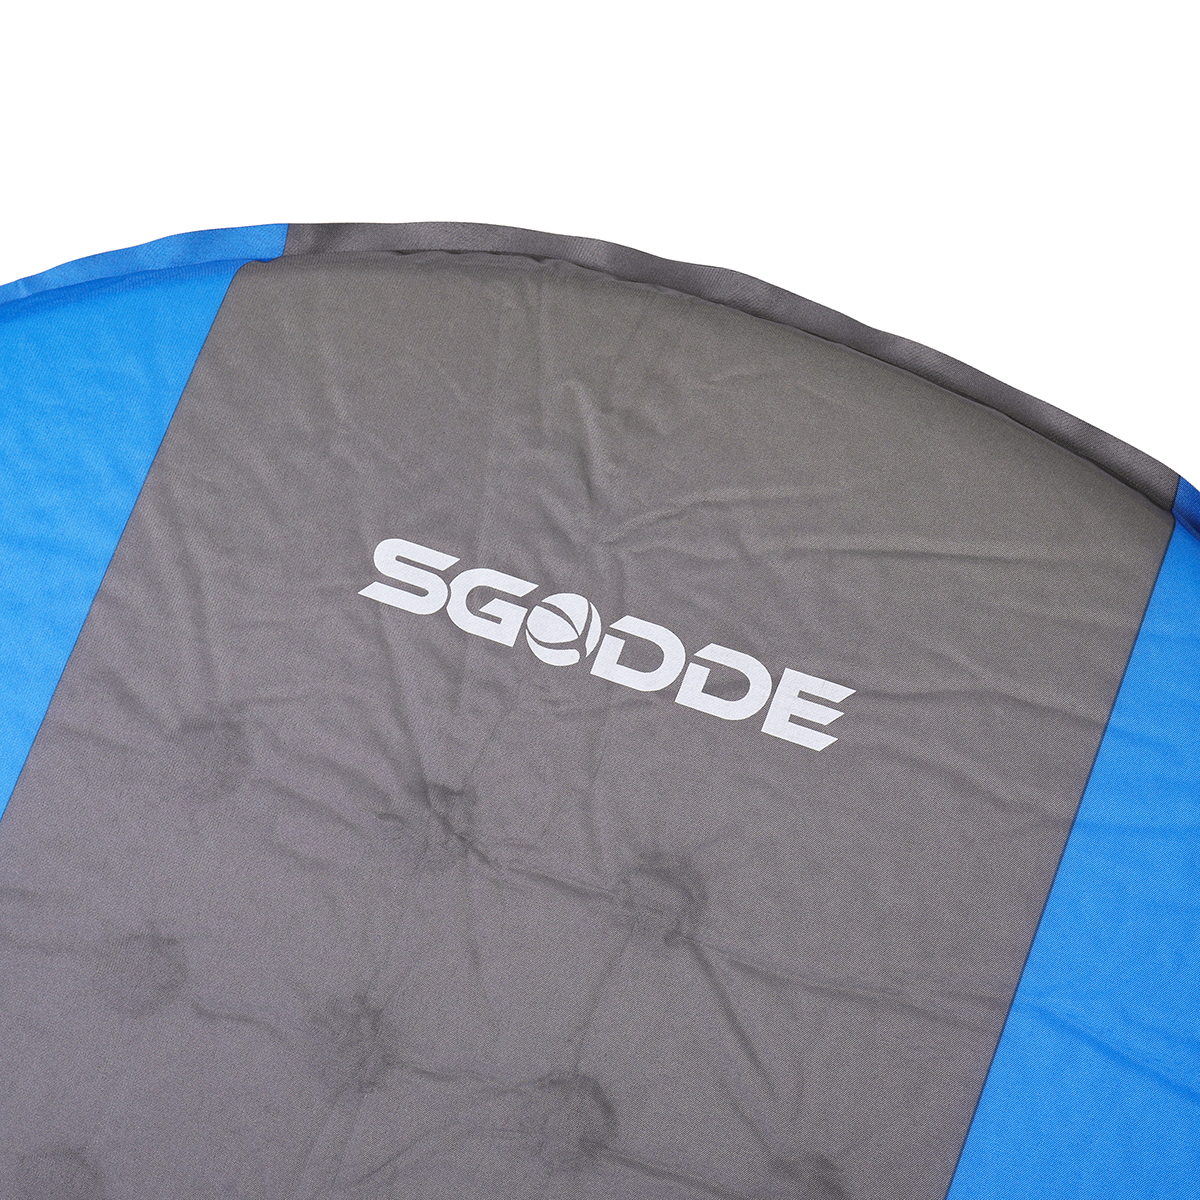 SGODDE-Inflatable-Sleeping-Mat-with-Pillow-Self-Inflating-Sleeping-Pad-Roll-Up-Foam-Bed-Pads-for-Out-1883996-11